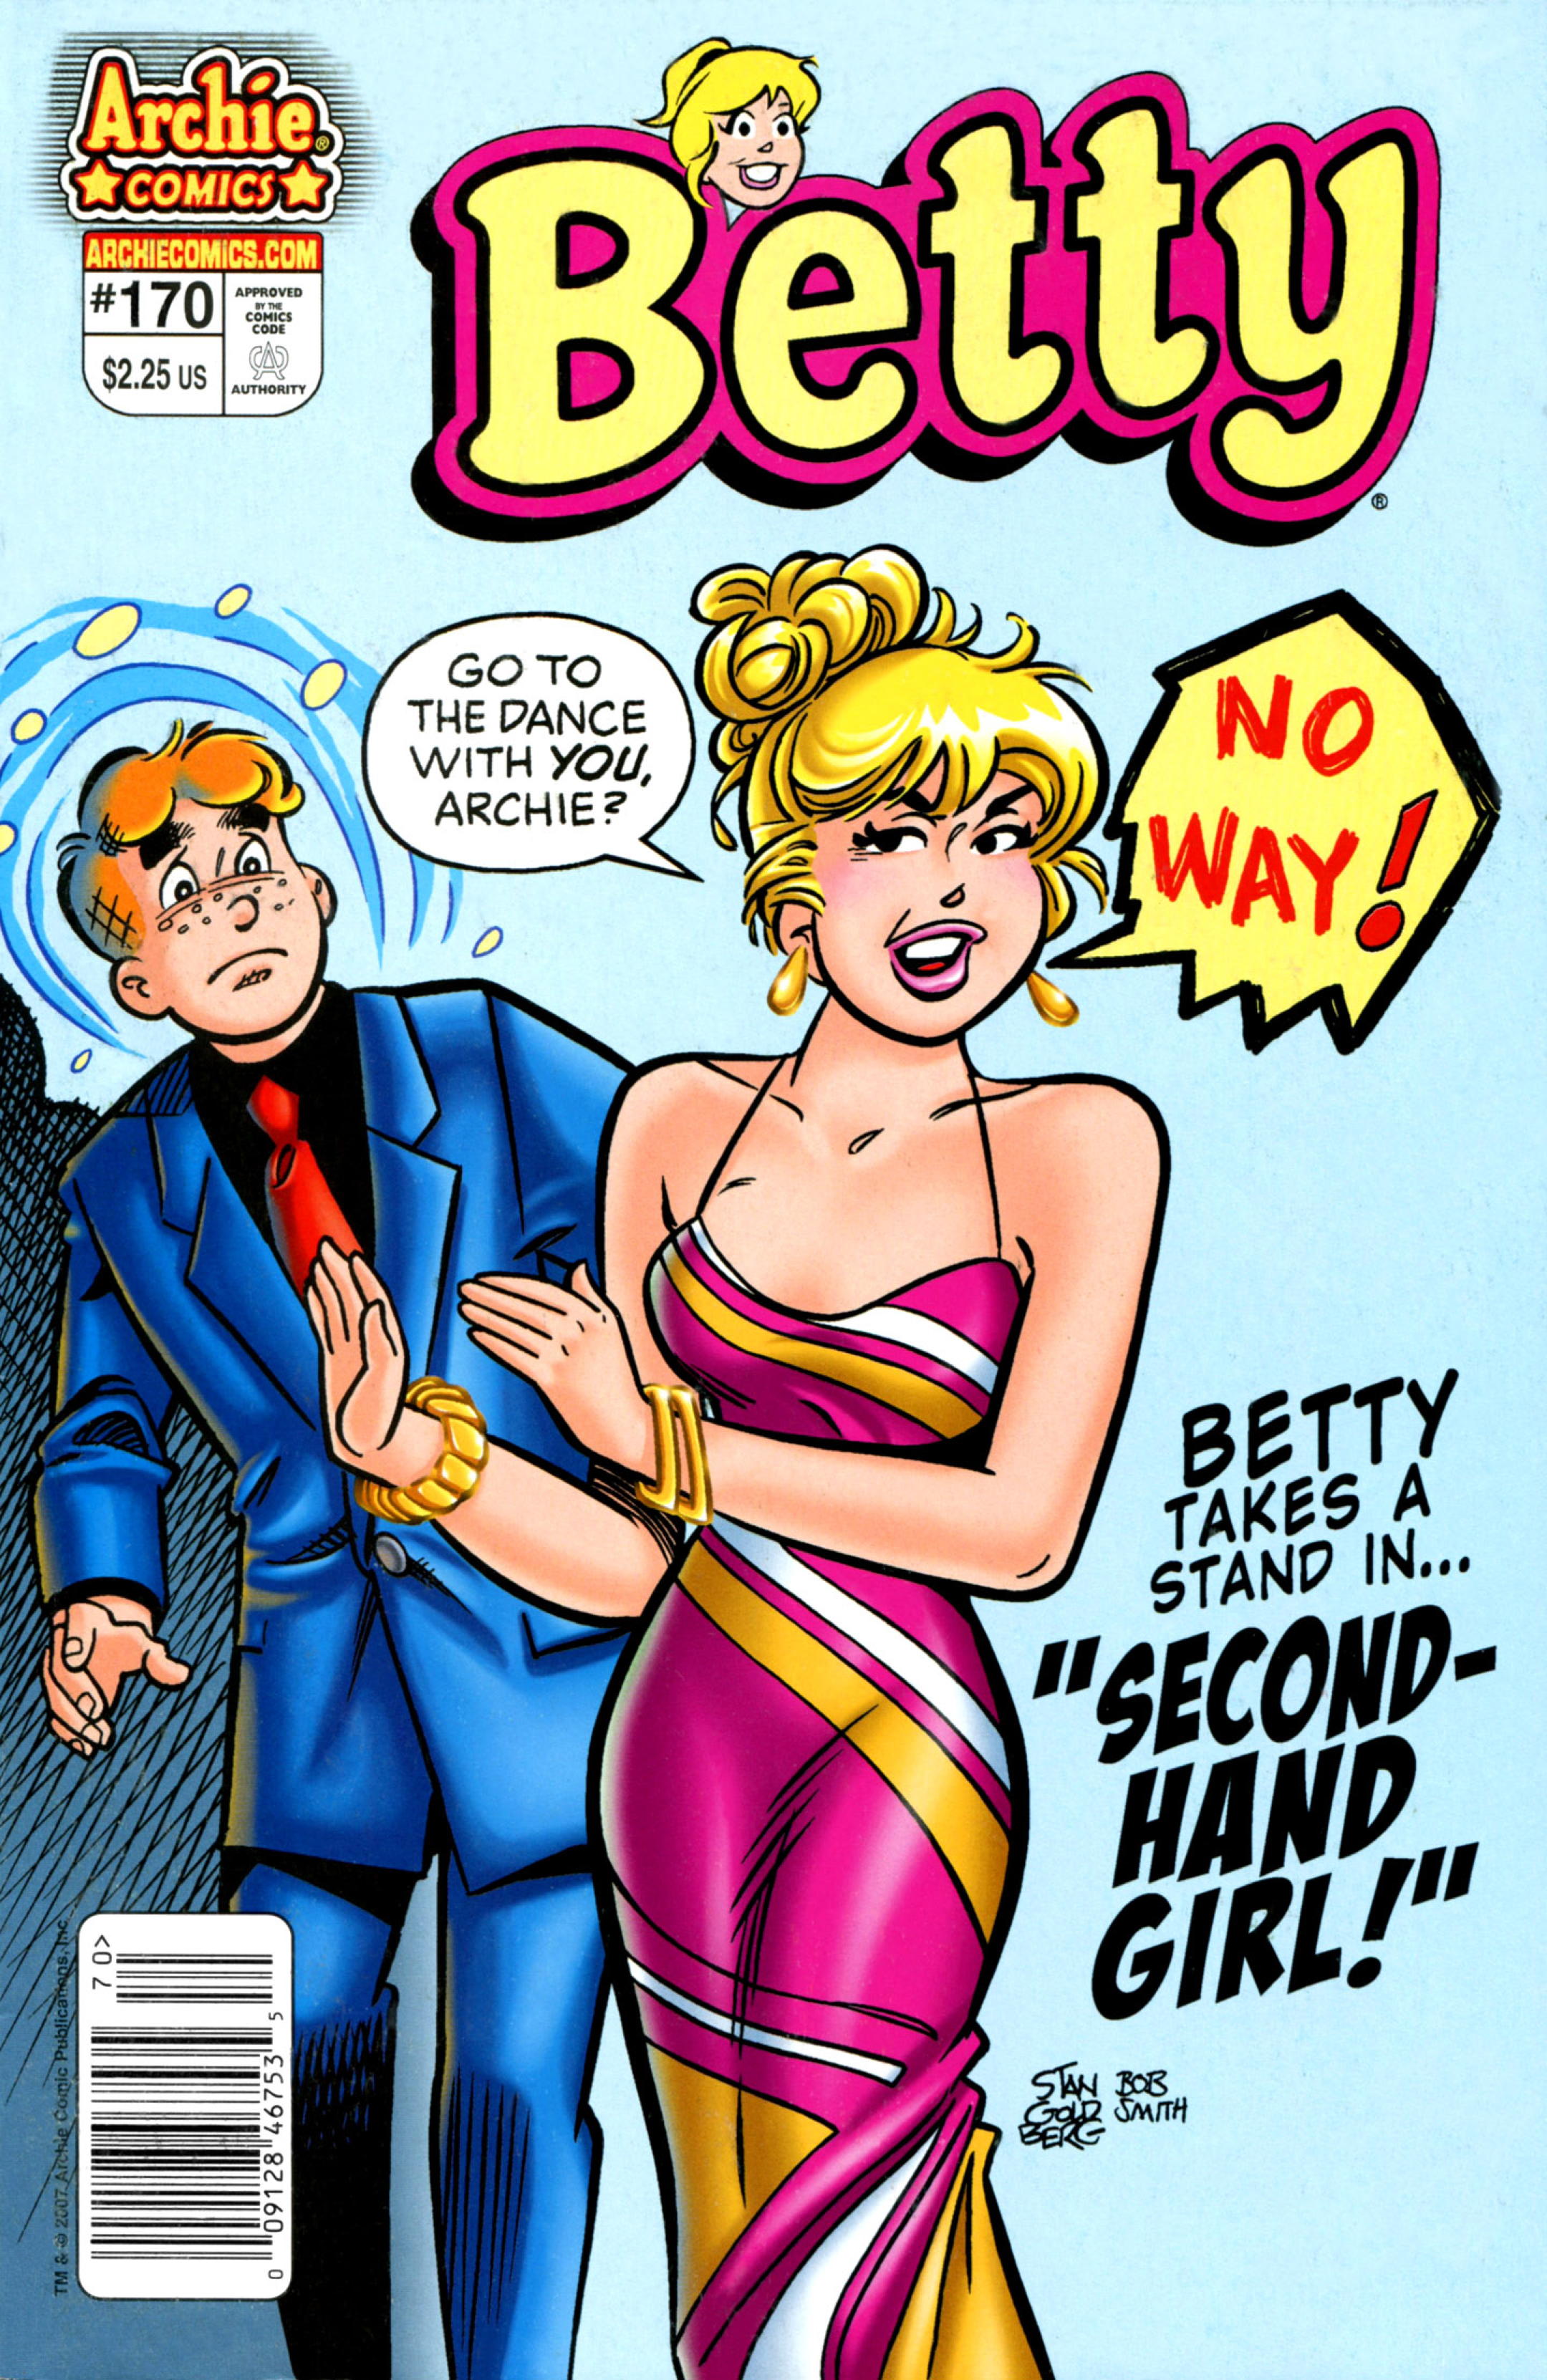 Read online Betty comic -  Issue #170 - 1